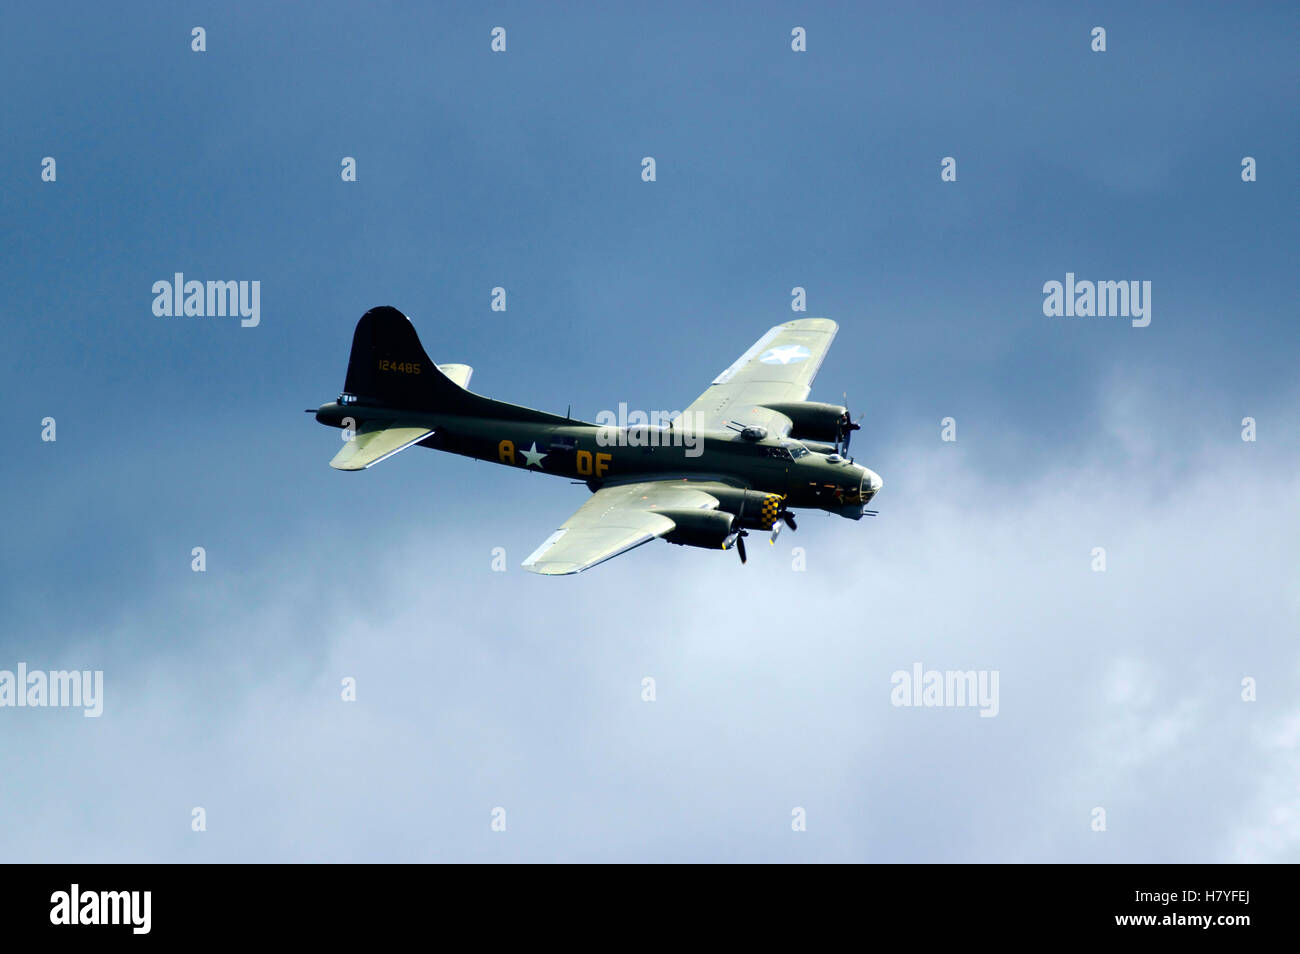 Boeng B-17 G Sally B, G-BEDF, Duxford Air Display, Angleterre, Royaume-Uni. Banque D'Images